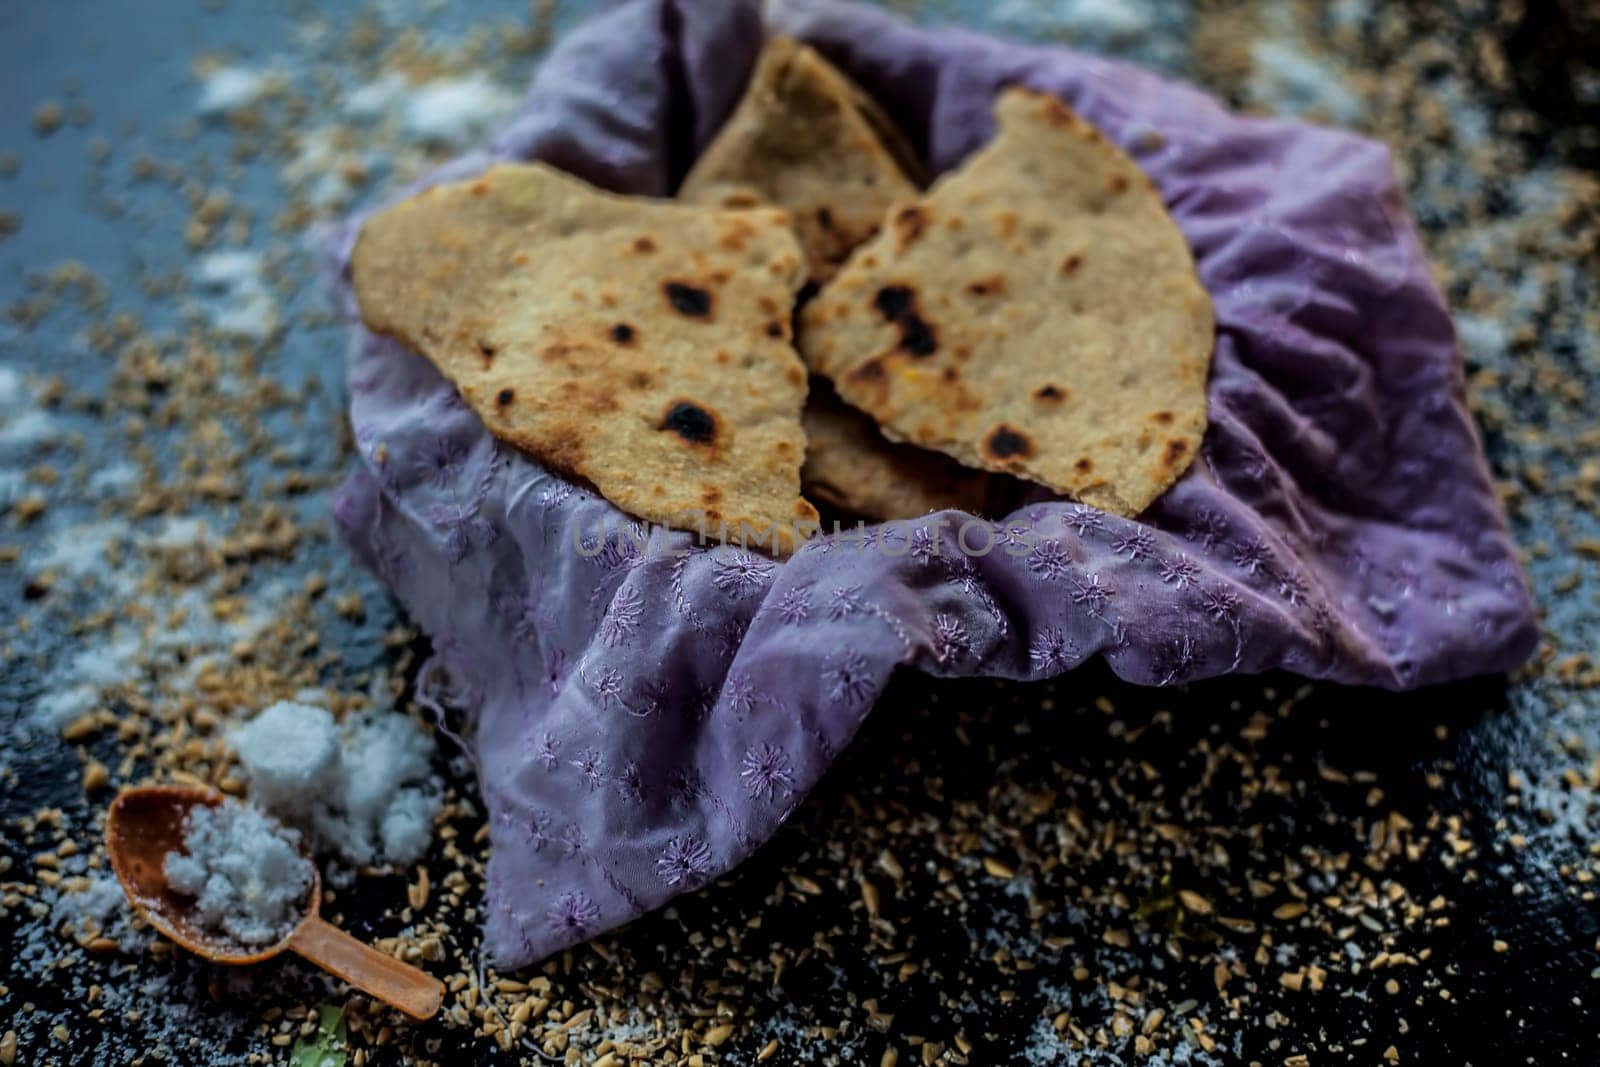 Close-up shot of round bread Bhakri on the black wooden surface along with some raw whole wheat, and salt in a container. Shot of Bhakri in a container on the black surface. by mirzamlk